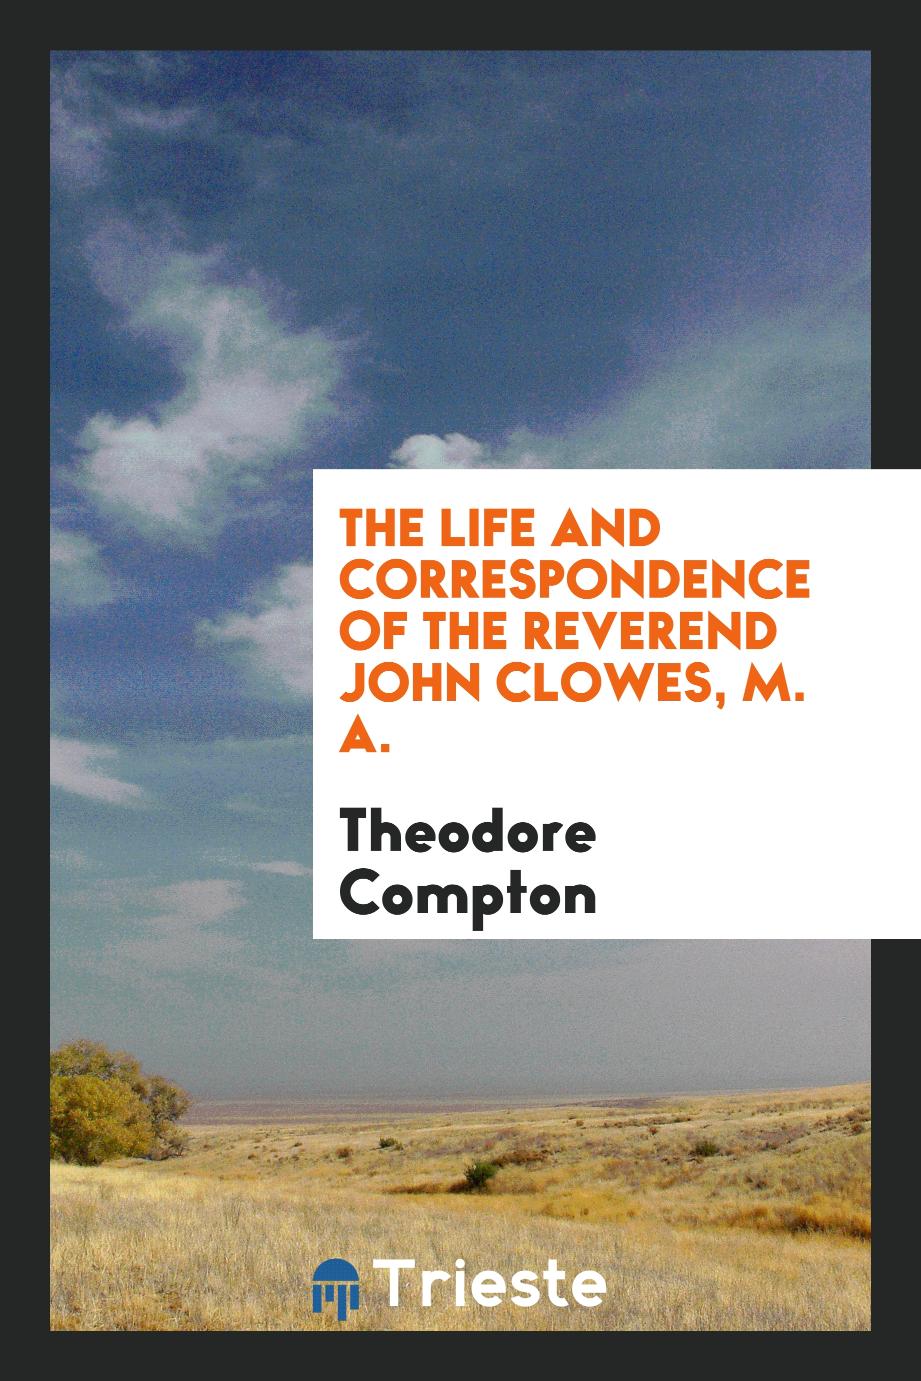 The Life and Correspondence of the Reverend John Clowes, M. A.